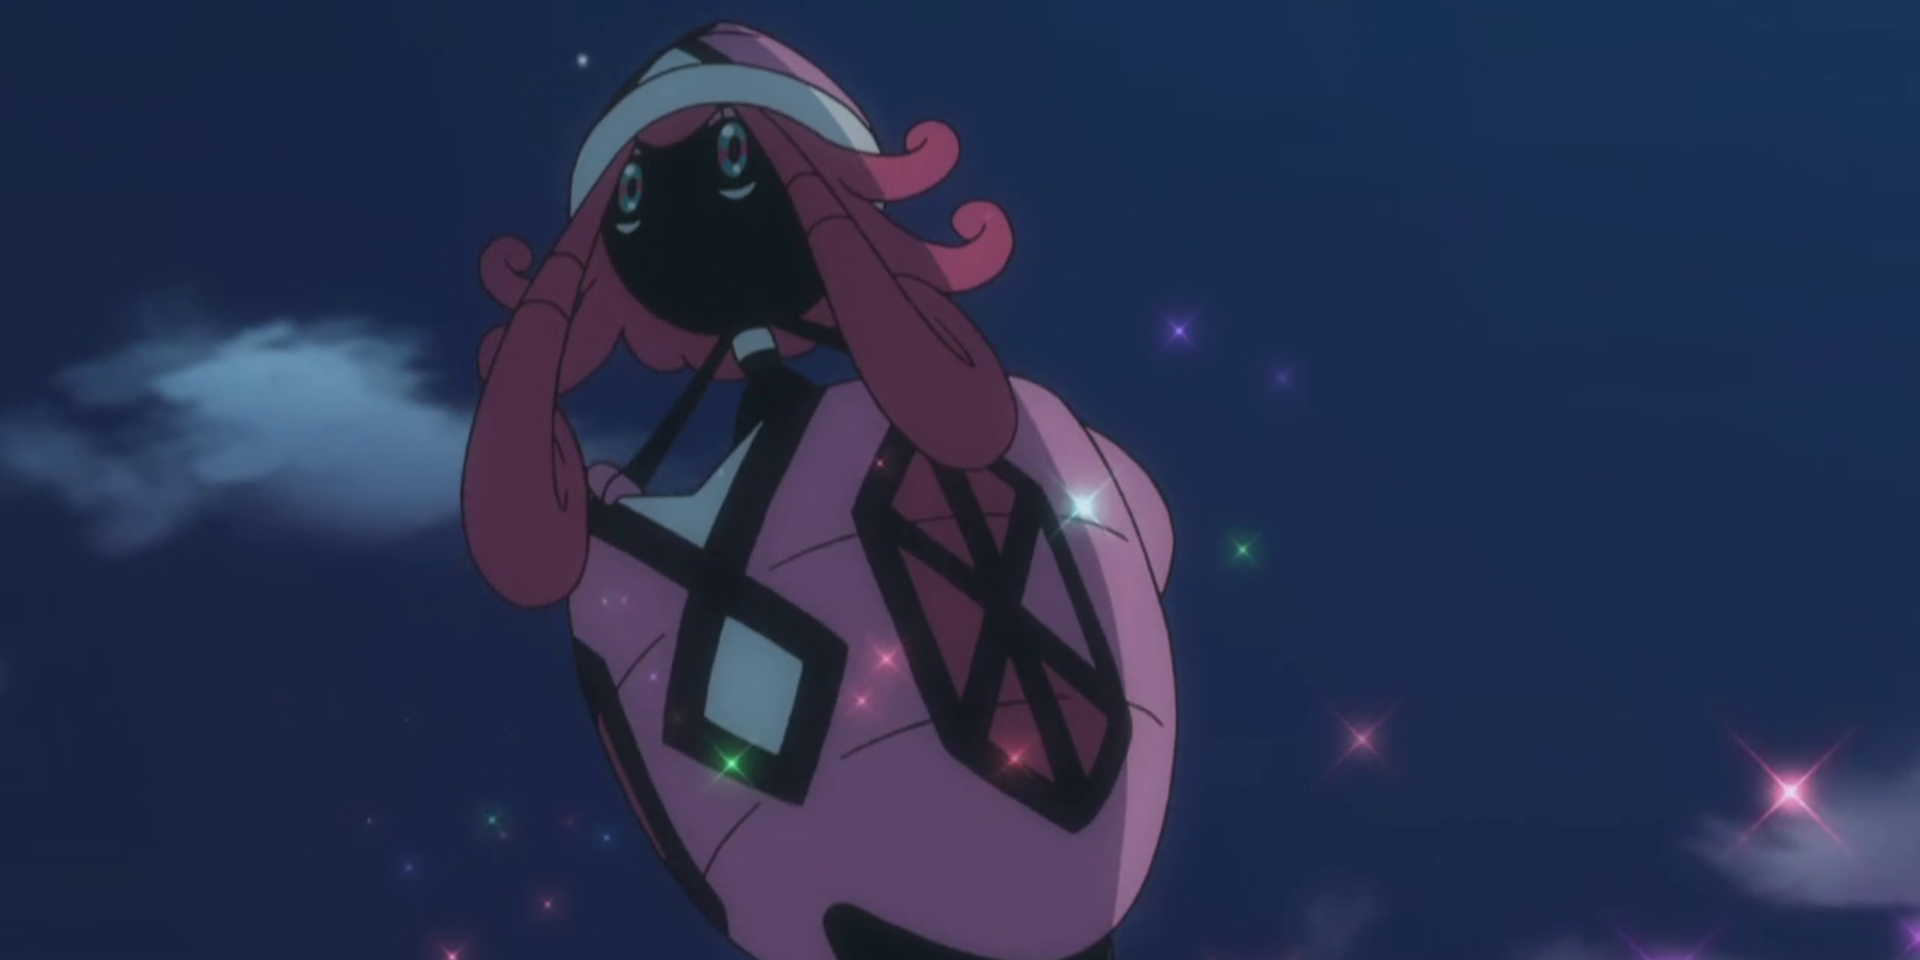 Tapu Lele floating at night in the Pokémon anime